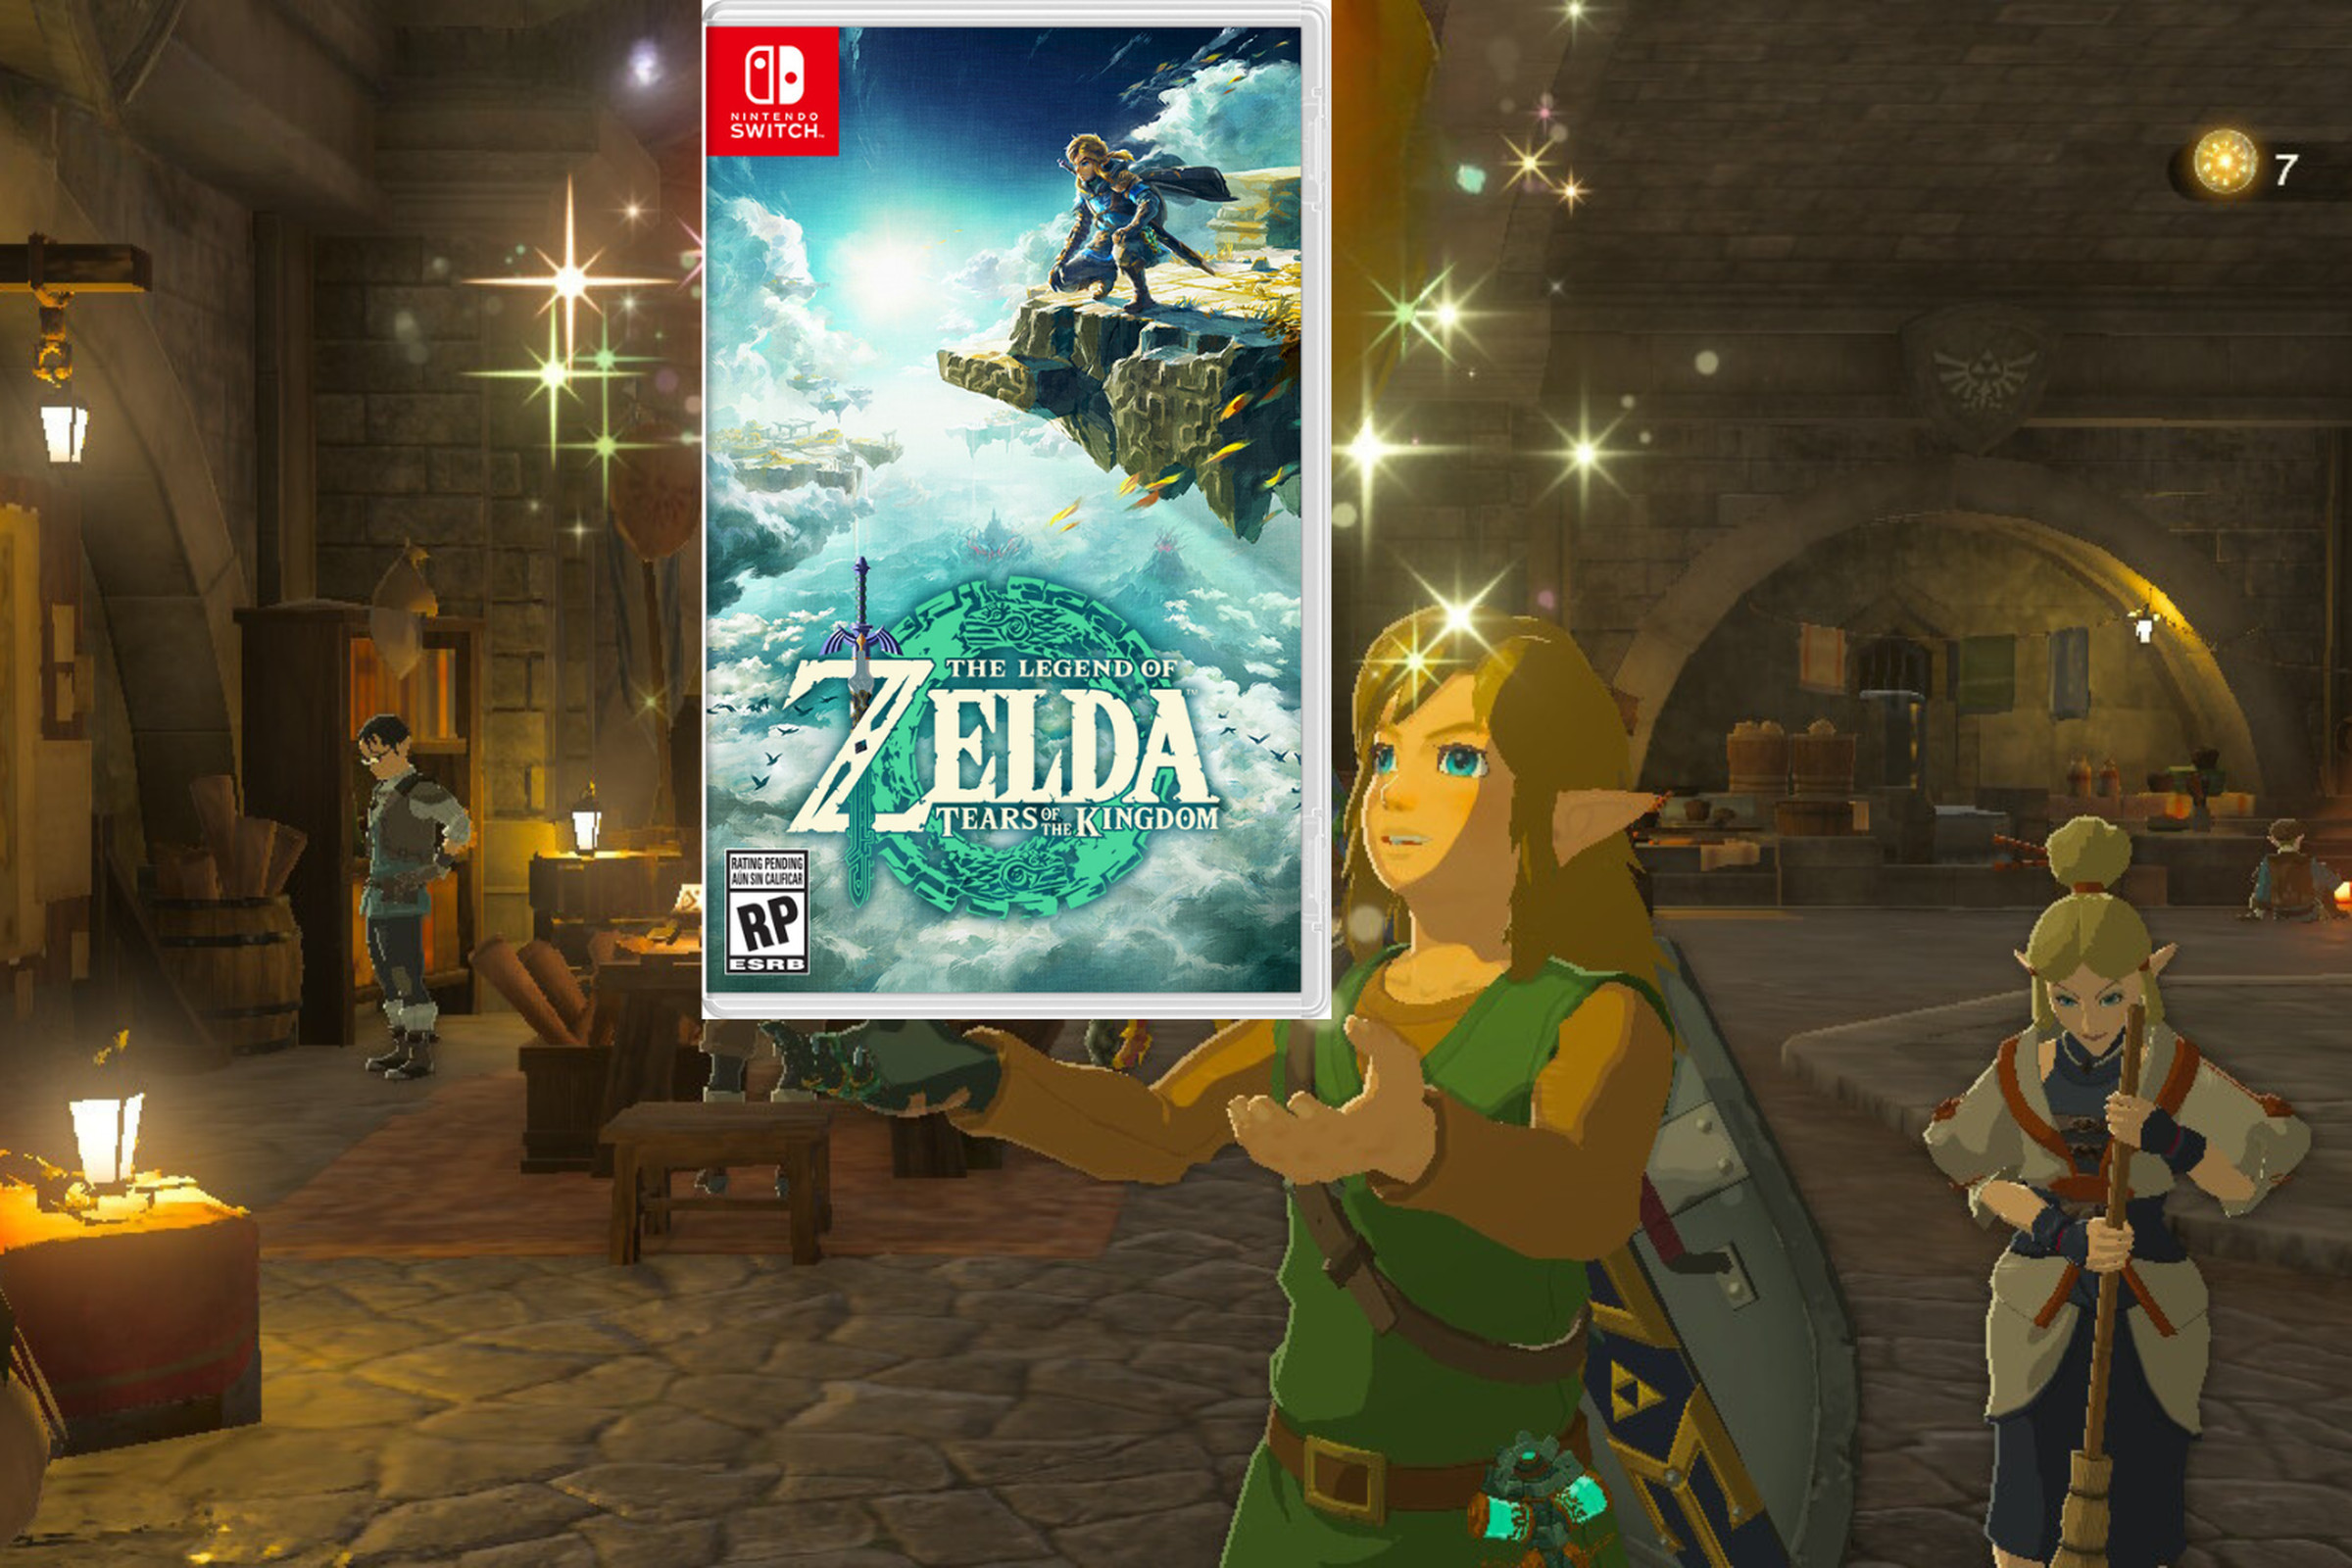 Photoshopped graphic from Tears of the Kingdom featuring the hero, Link, holding up a glowing copy of The Legend of Zelda: Tears of the Kingdom